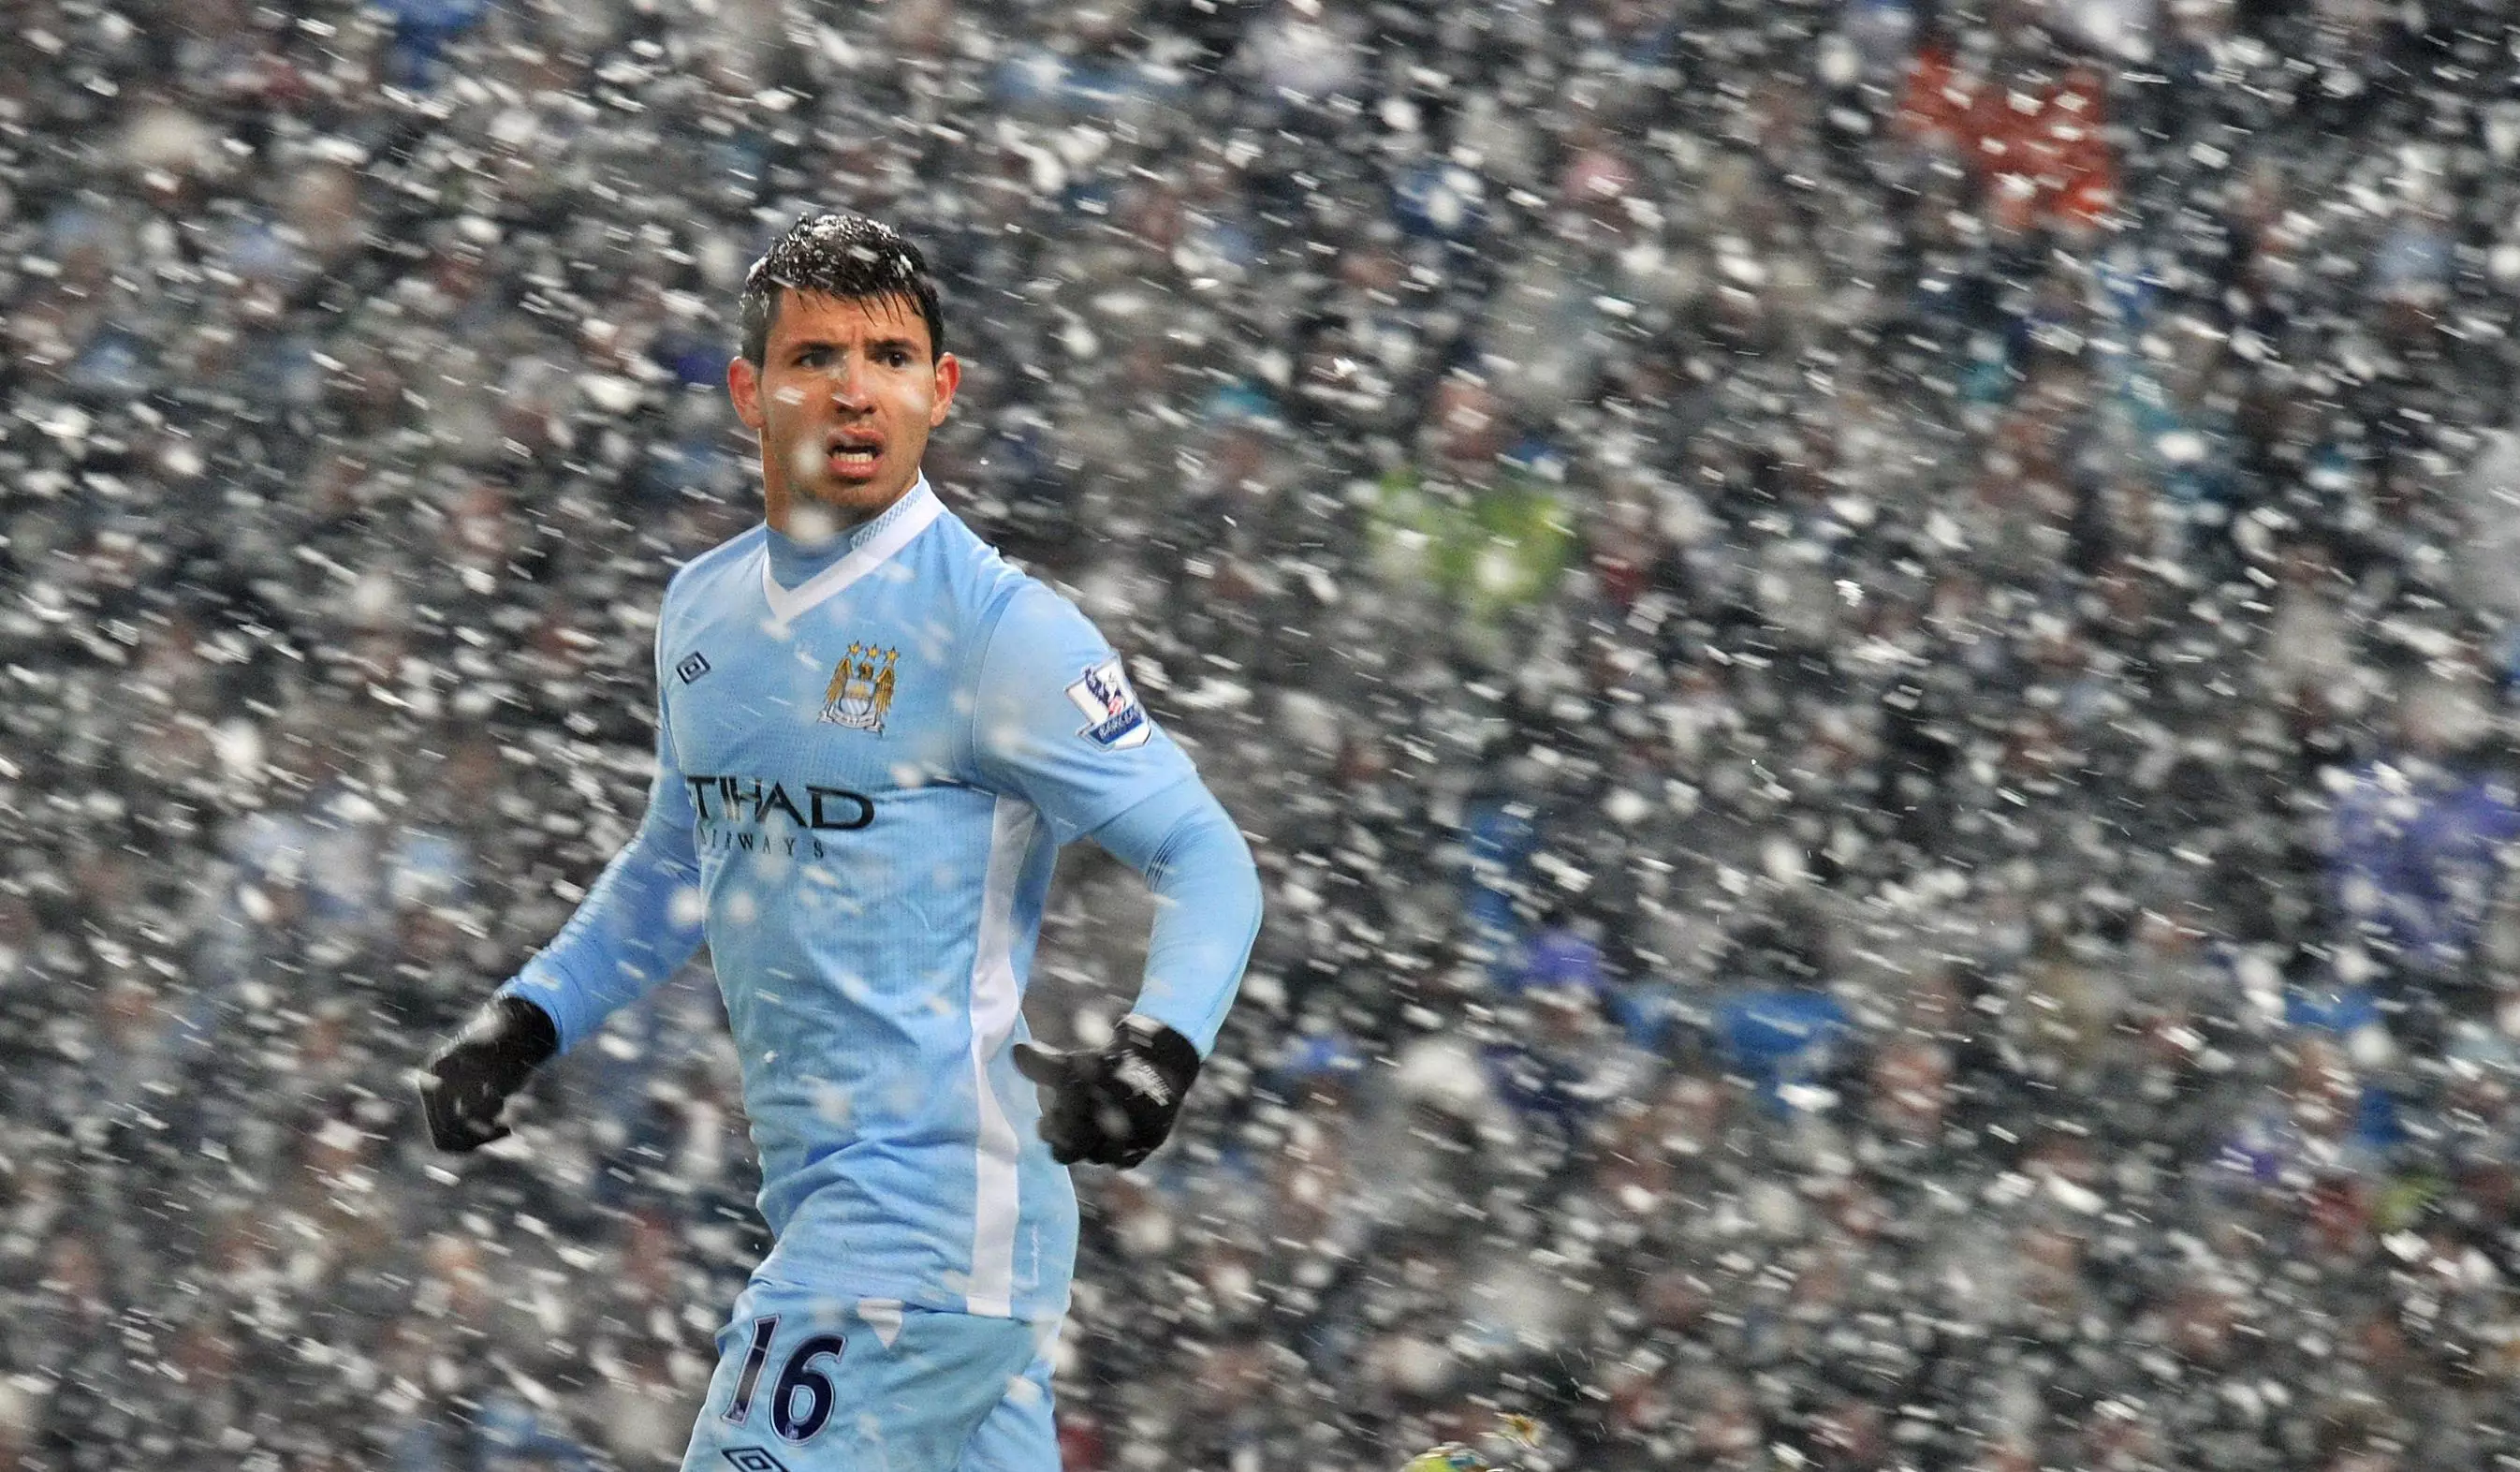 Manchester City striker Sergio Aguero in the snow during a February Premier League fixture in 2012.